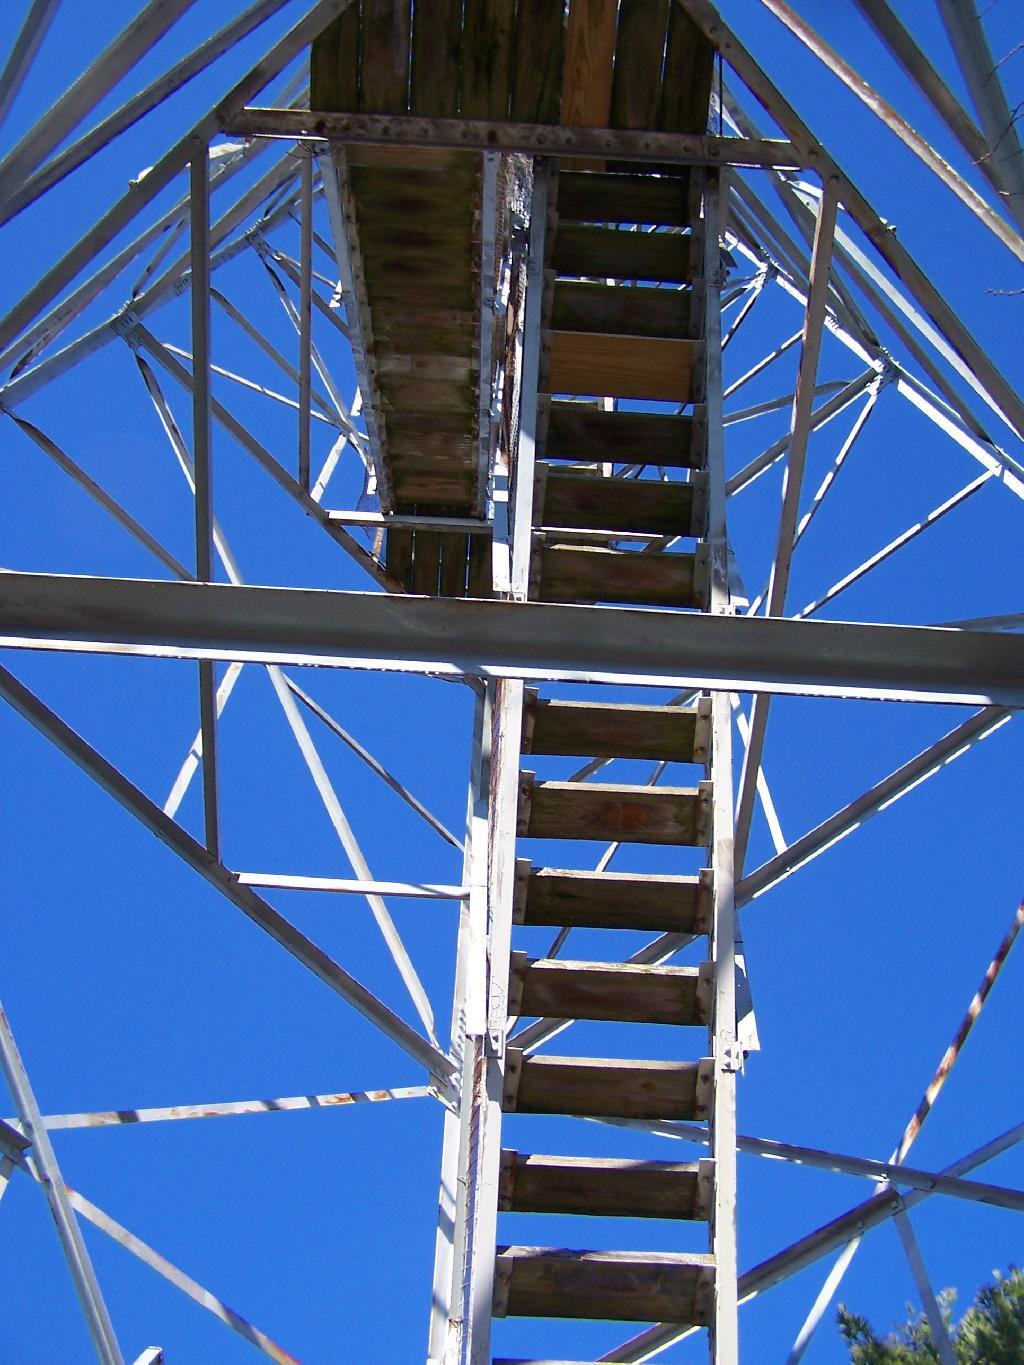  Looking Up Tower